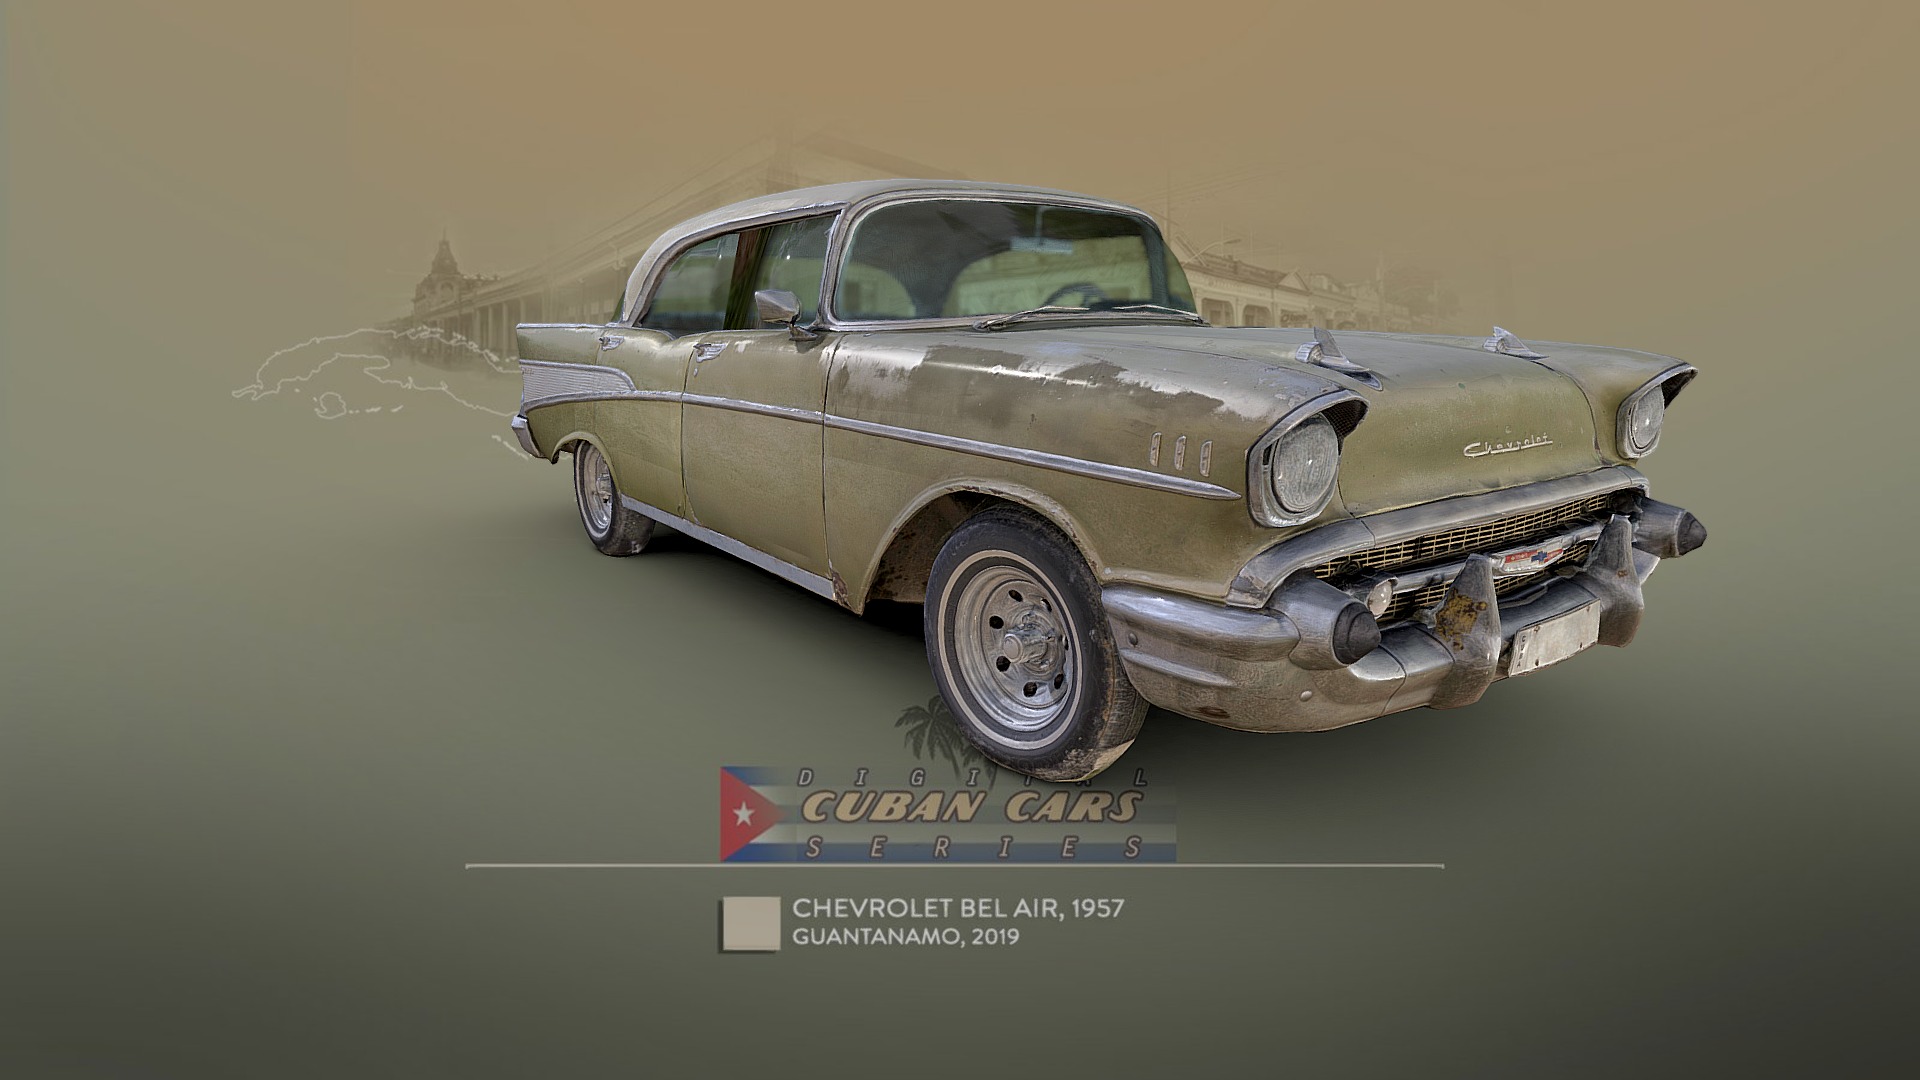 3D model Chevrolet 1957 Bel Air, Guantanamo, Cuba - This is a 3D model of the Chevrolet 1957 Bel Air, Guantanamo, Cuba. The 3D model is about a car with a sign on it.